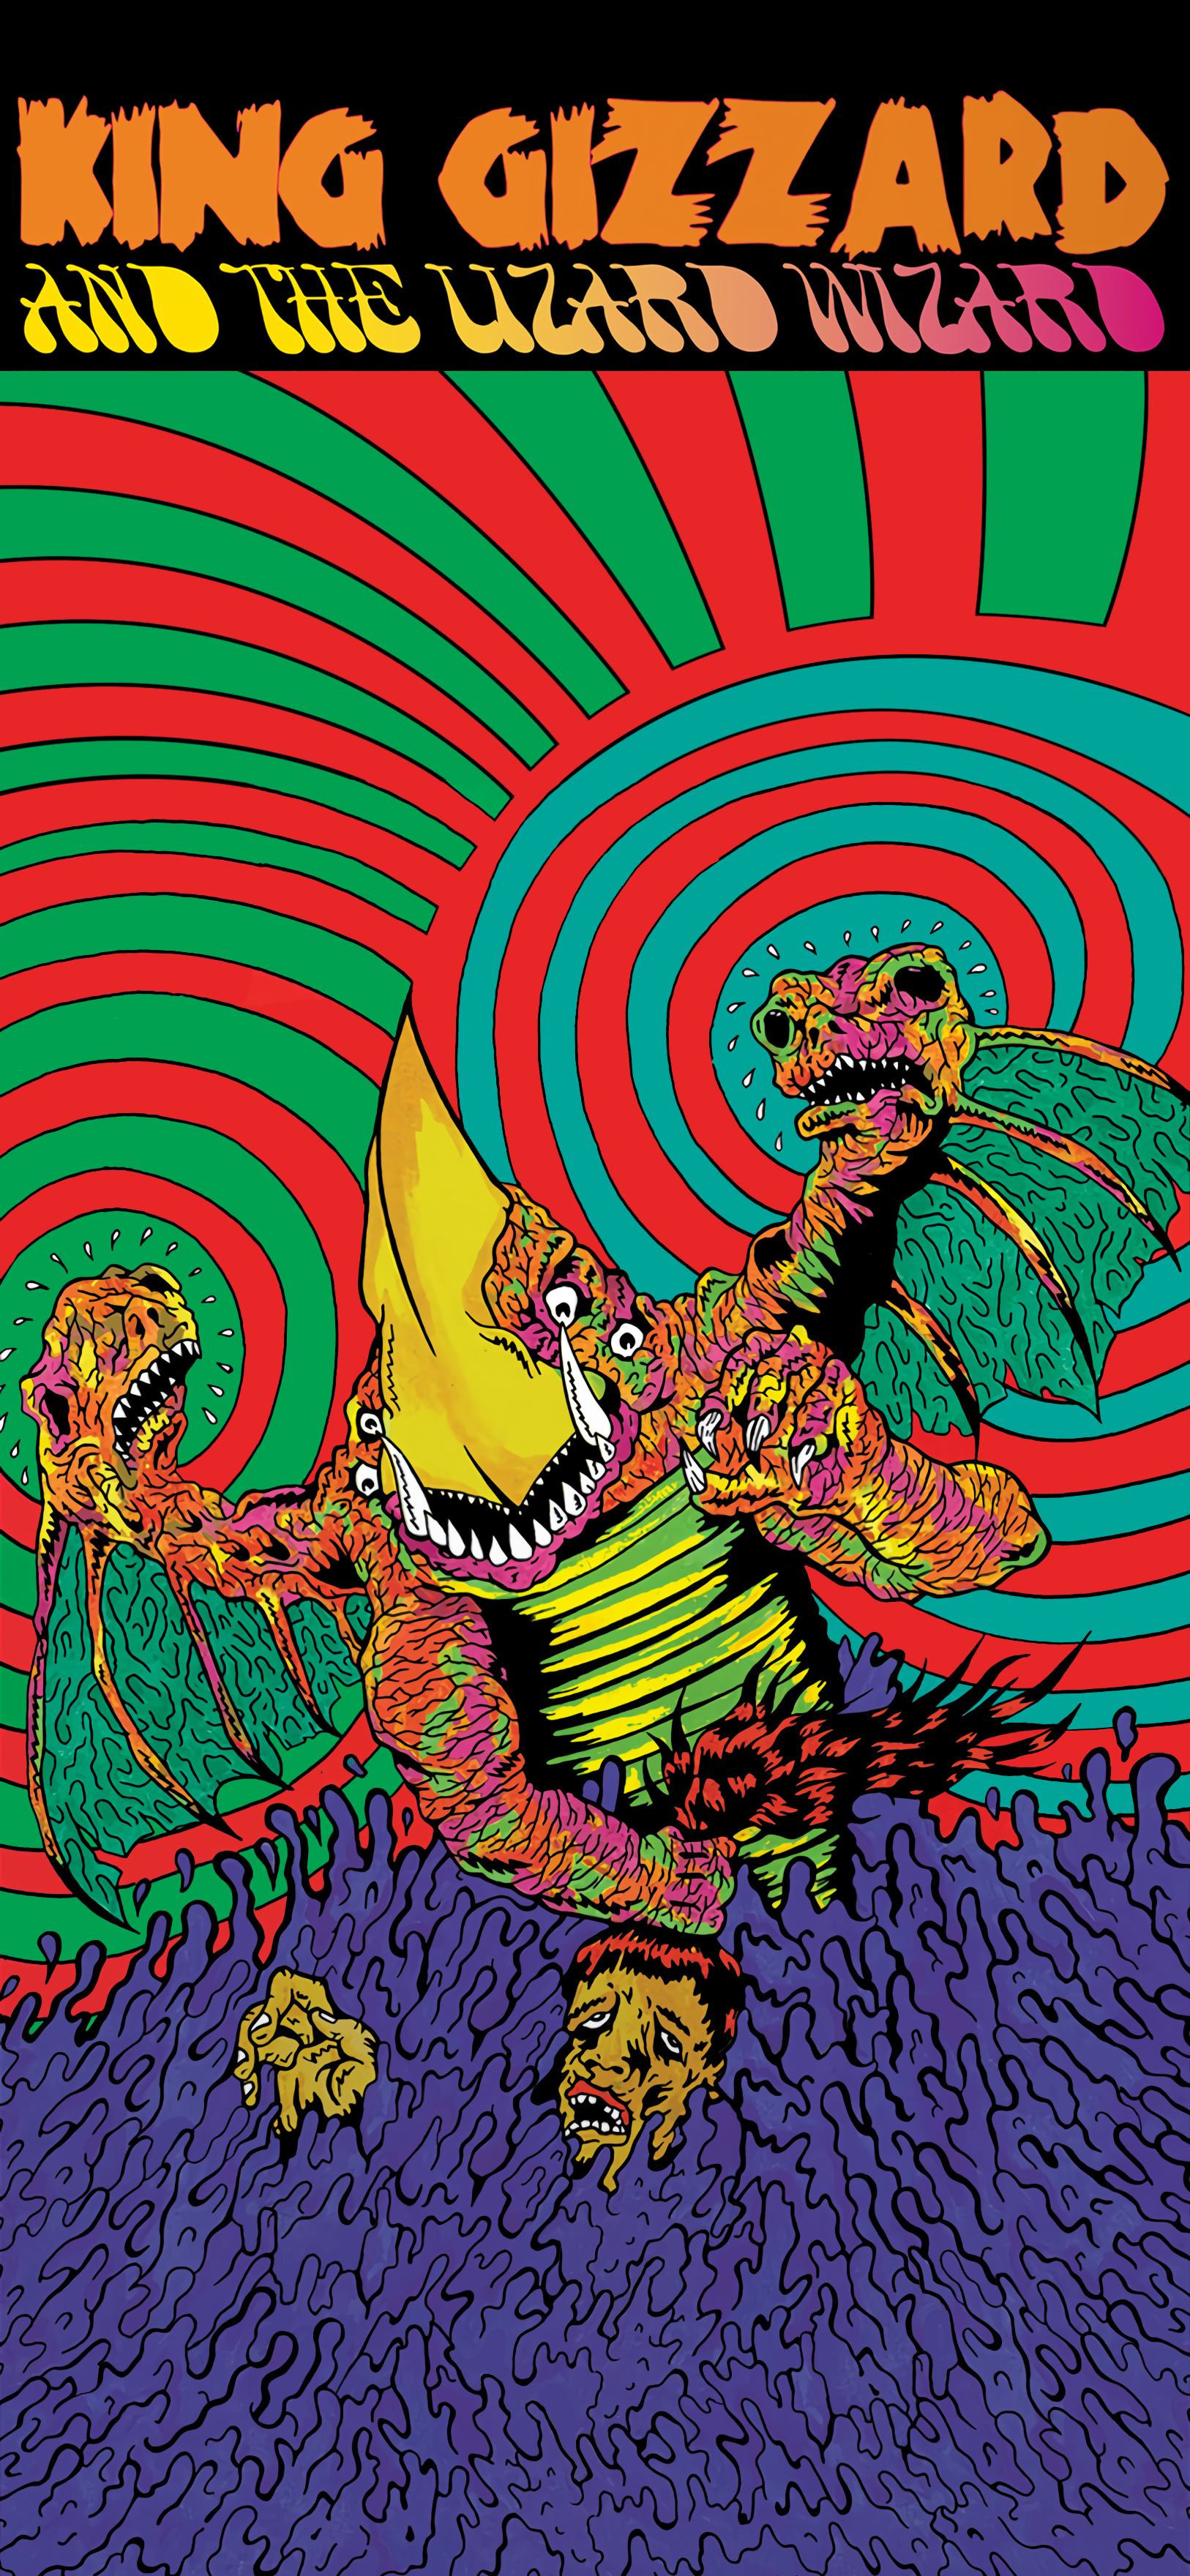 More King Gizzard Wallpapers I also added in some non King Gizzard bands  too  rKGATLW